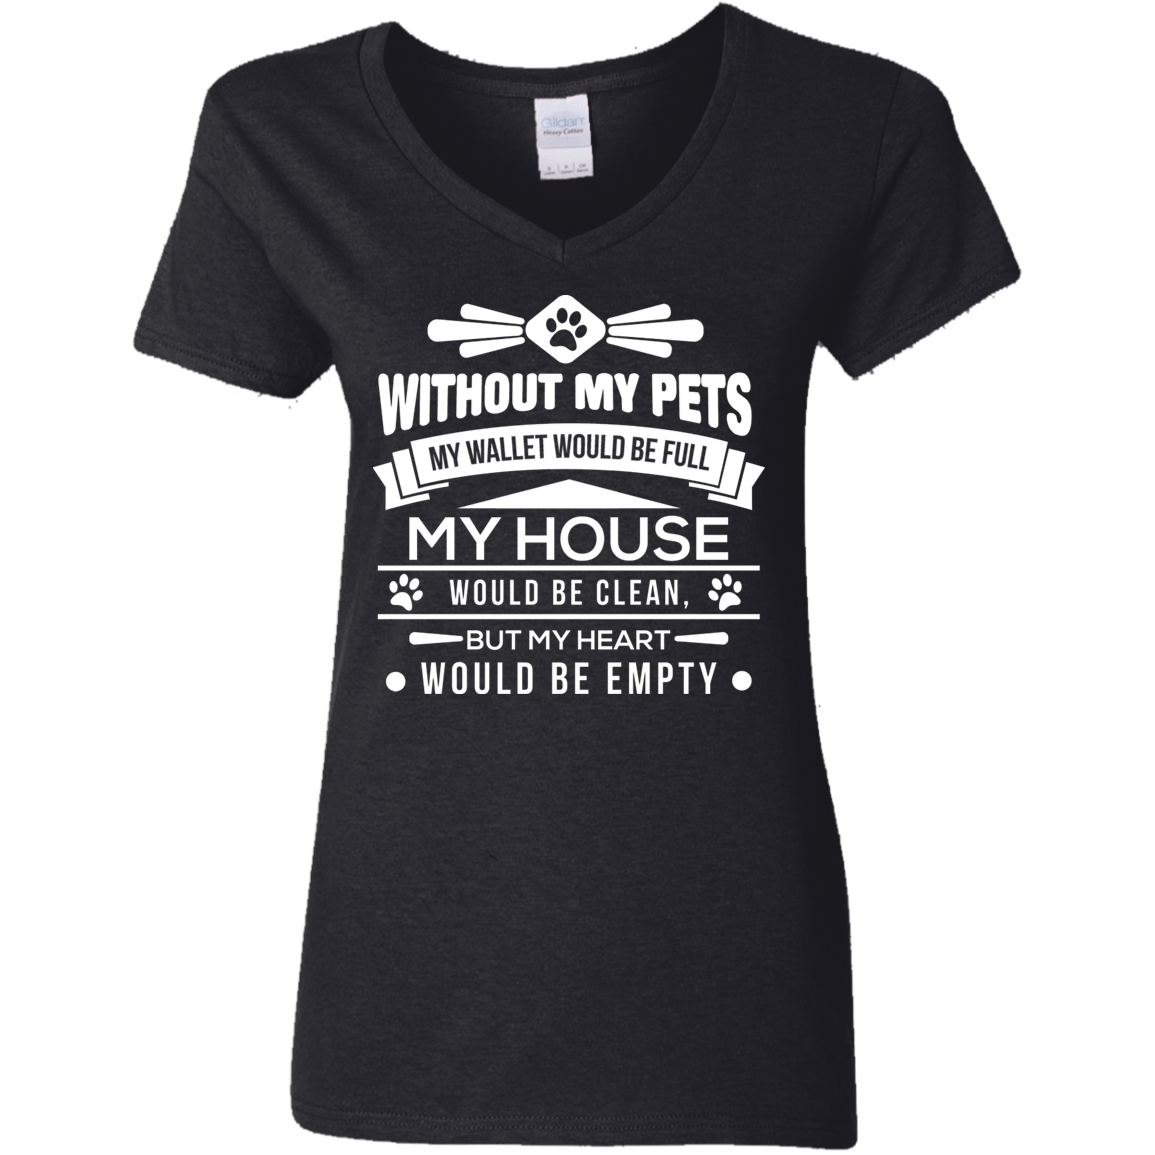 Without My Pets - Ladies V Neck.